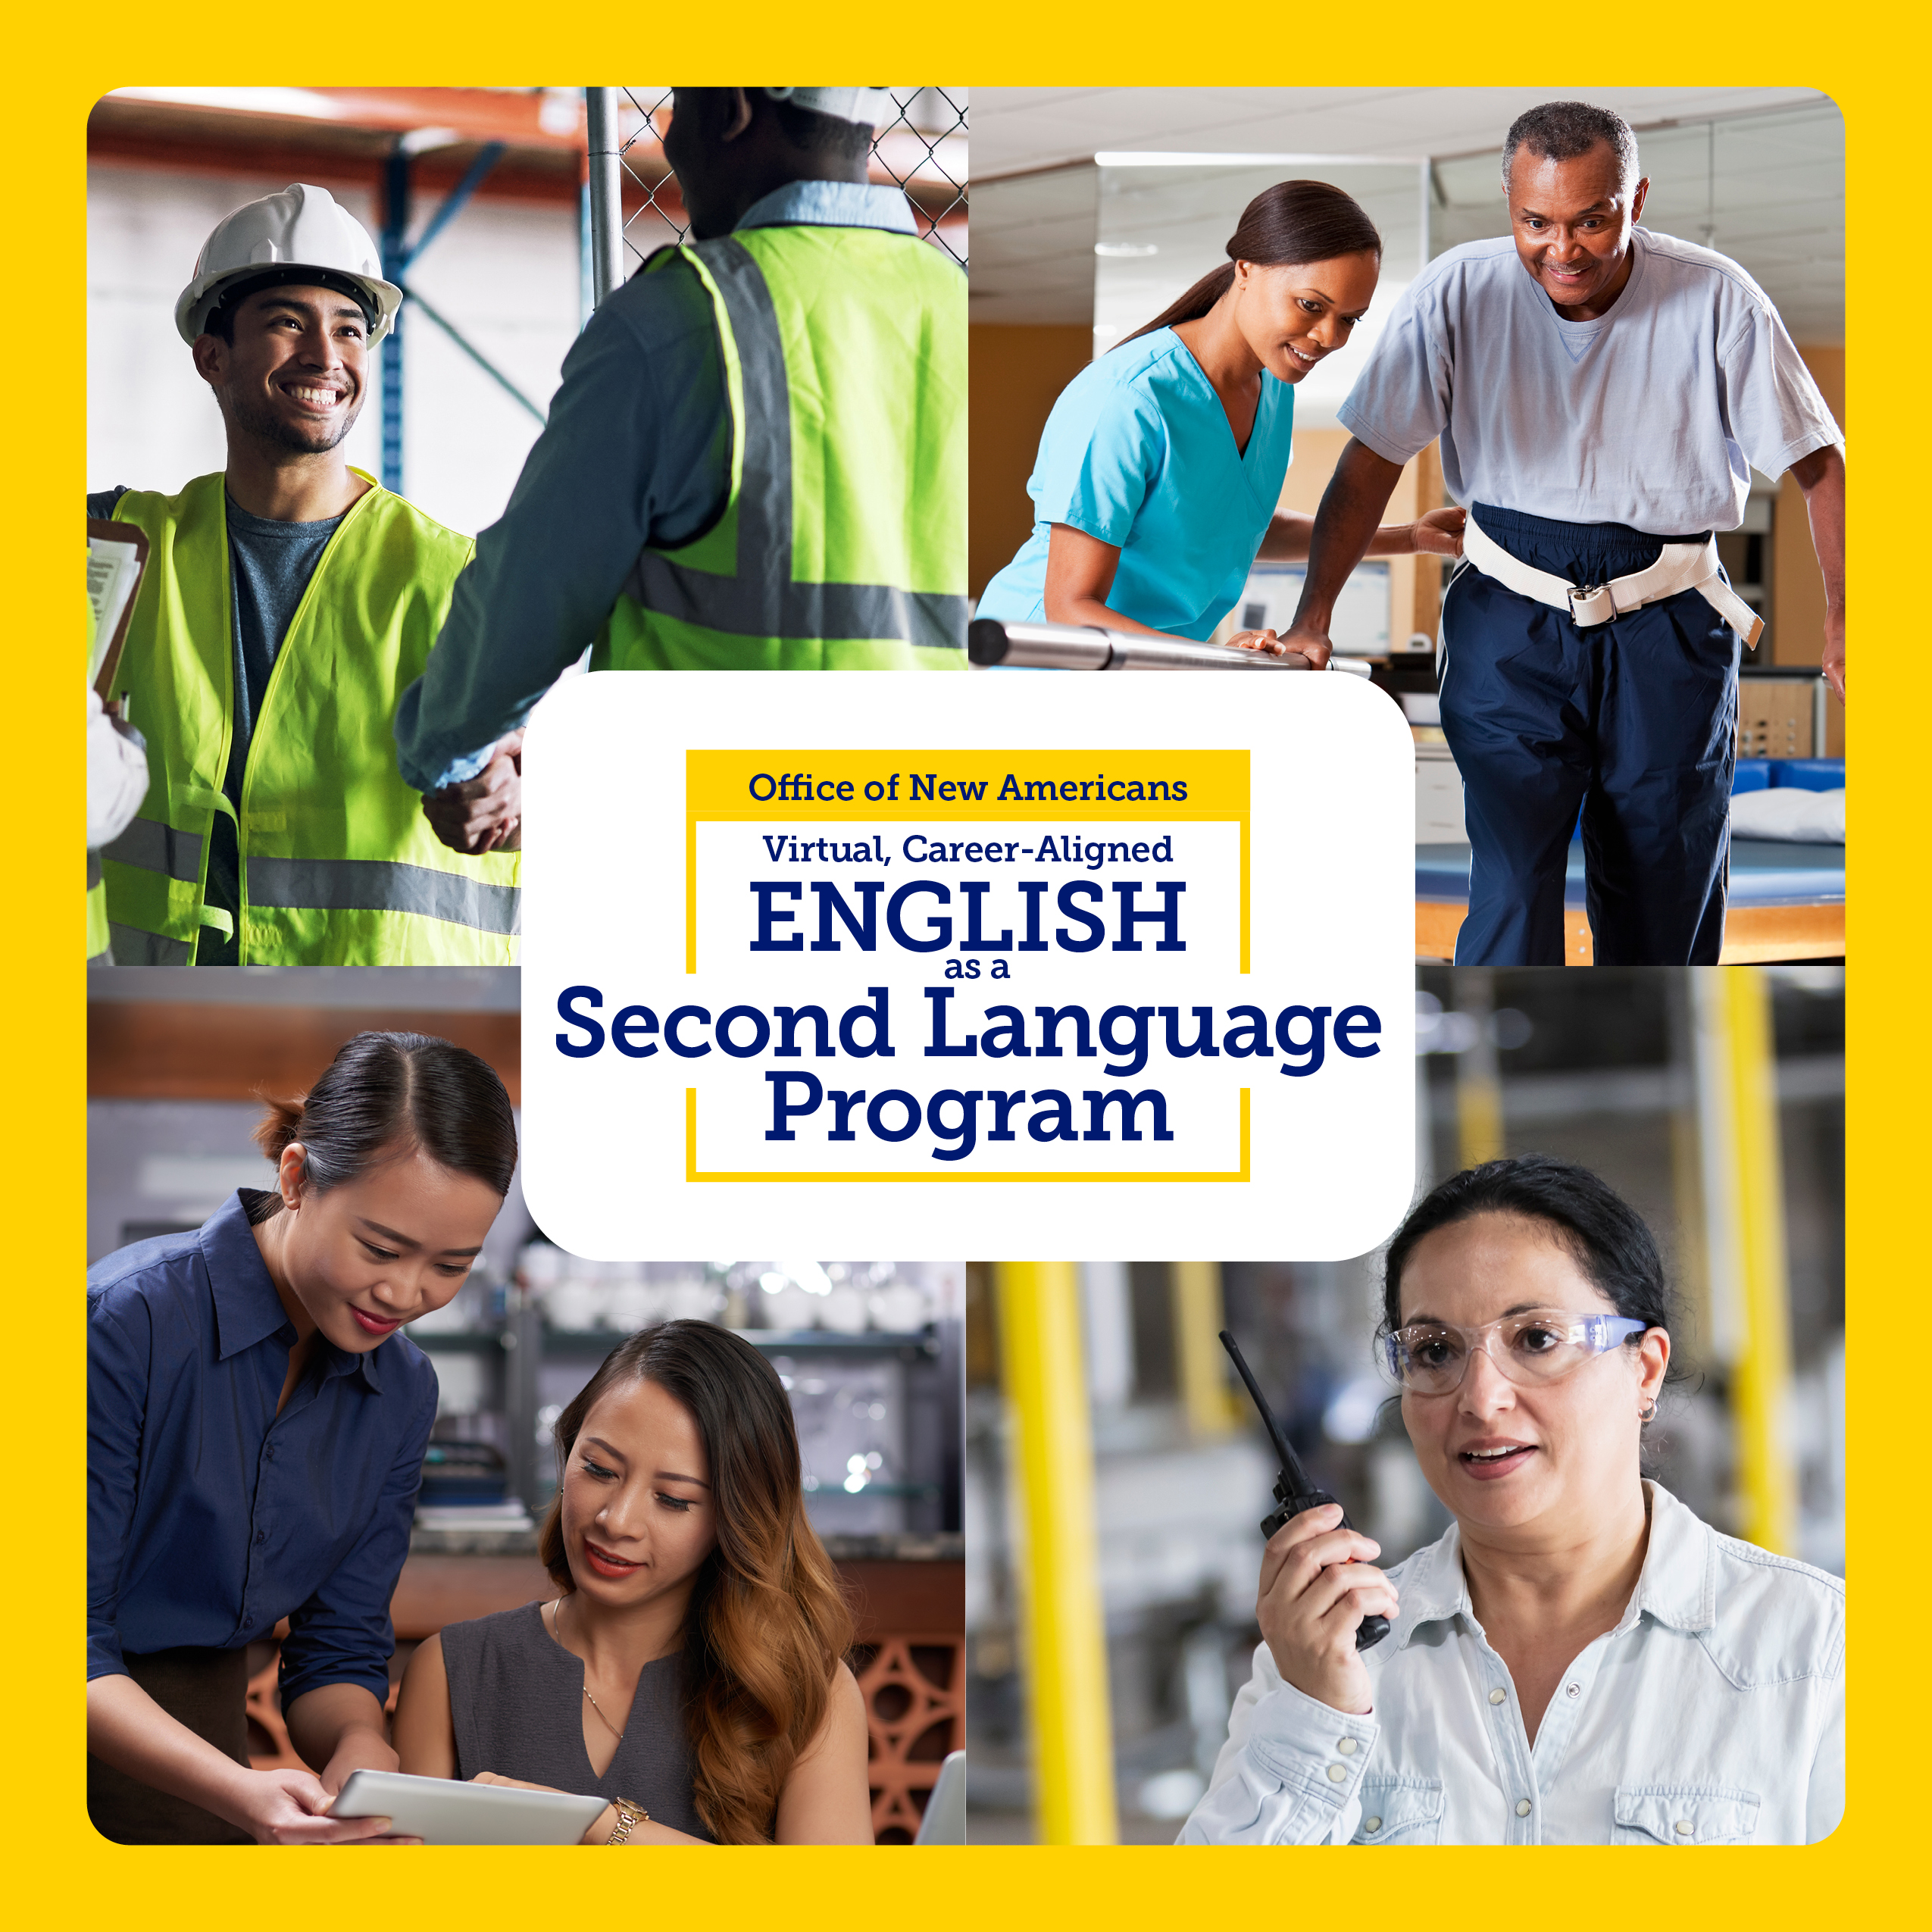 Office of New Americans: Virtual, Career-Aligned English as a Second Language Program